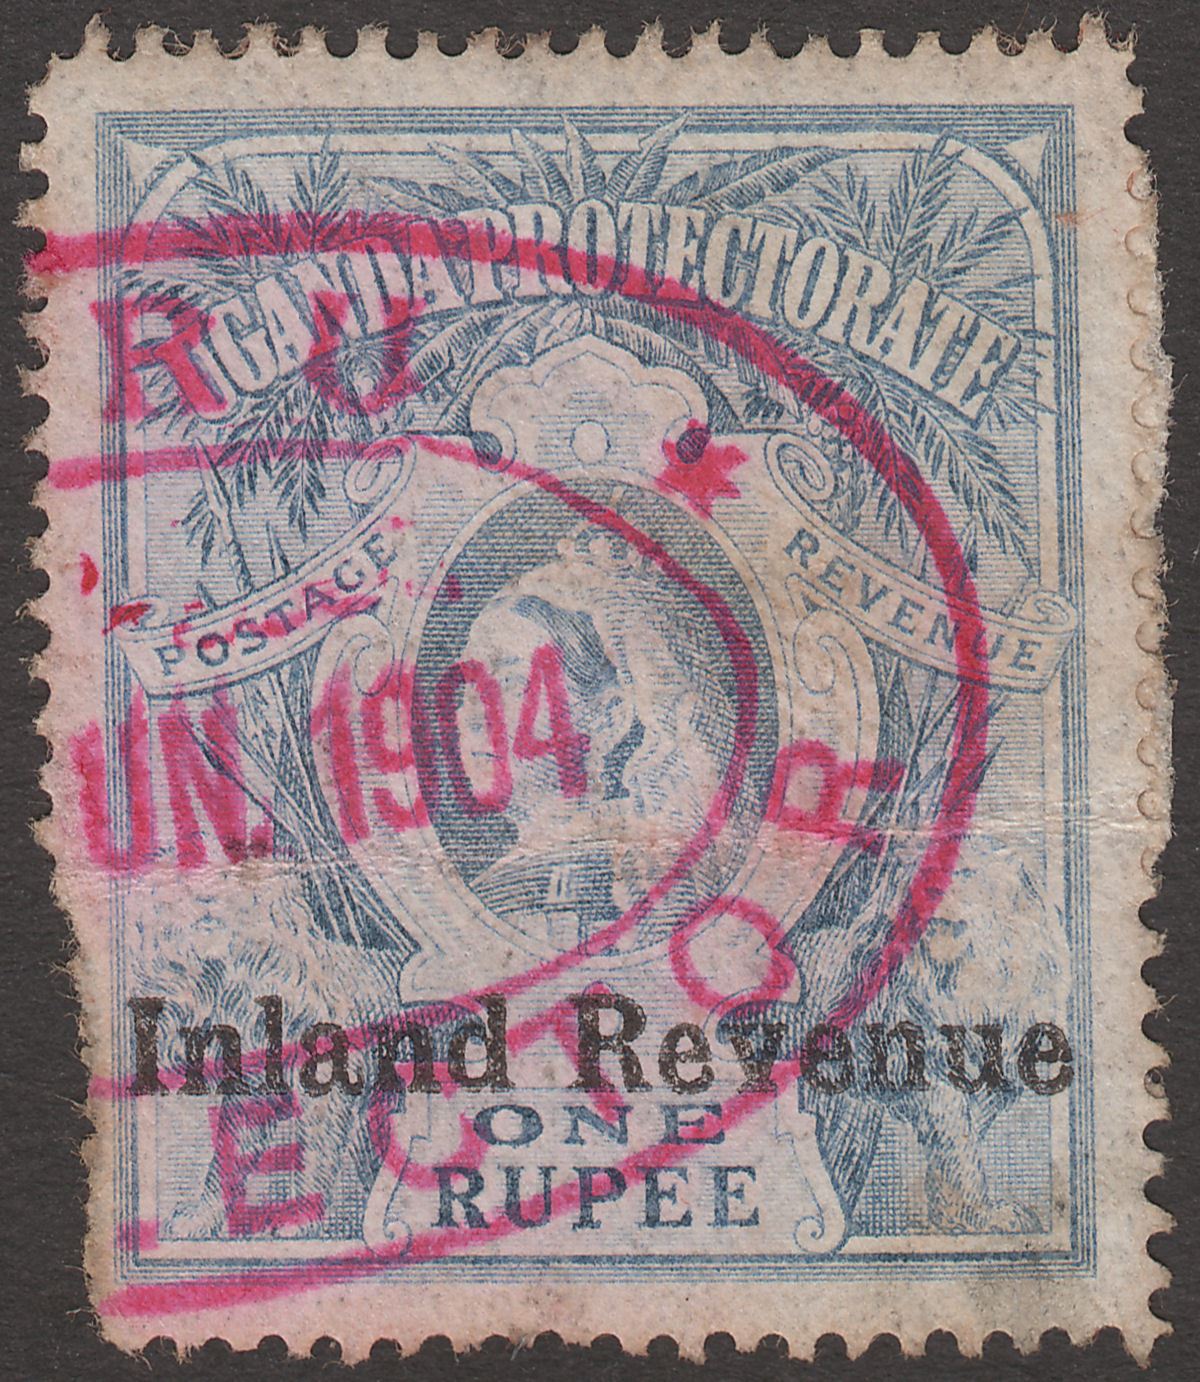 Uganda 1898 Queen Victoria Inland Revenue Overprint 1r Blue Used with faults